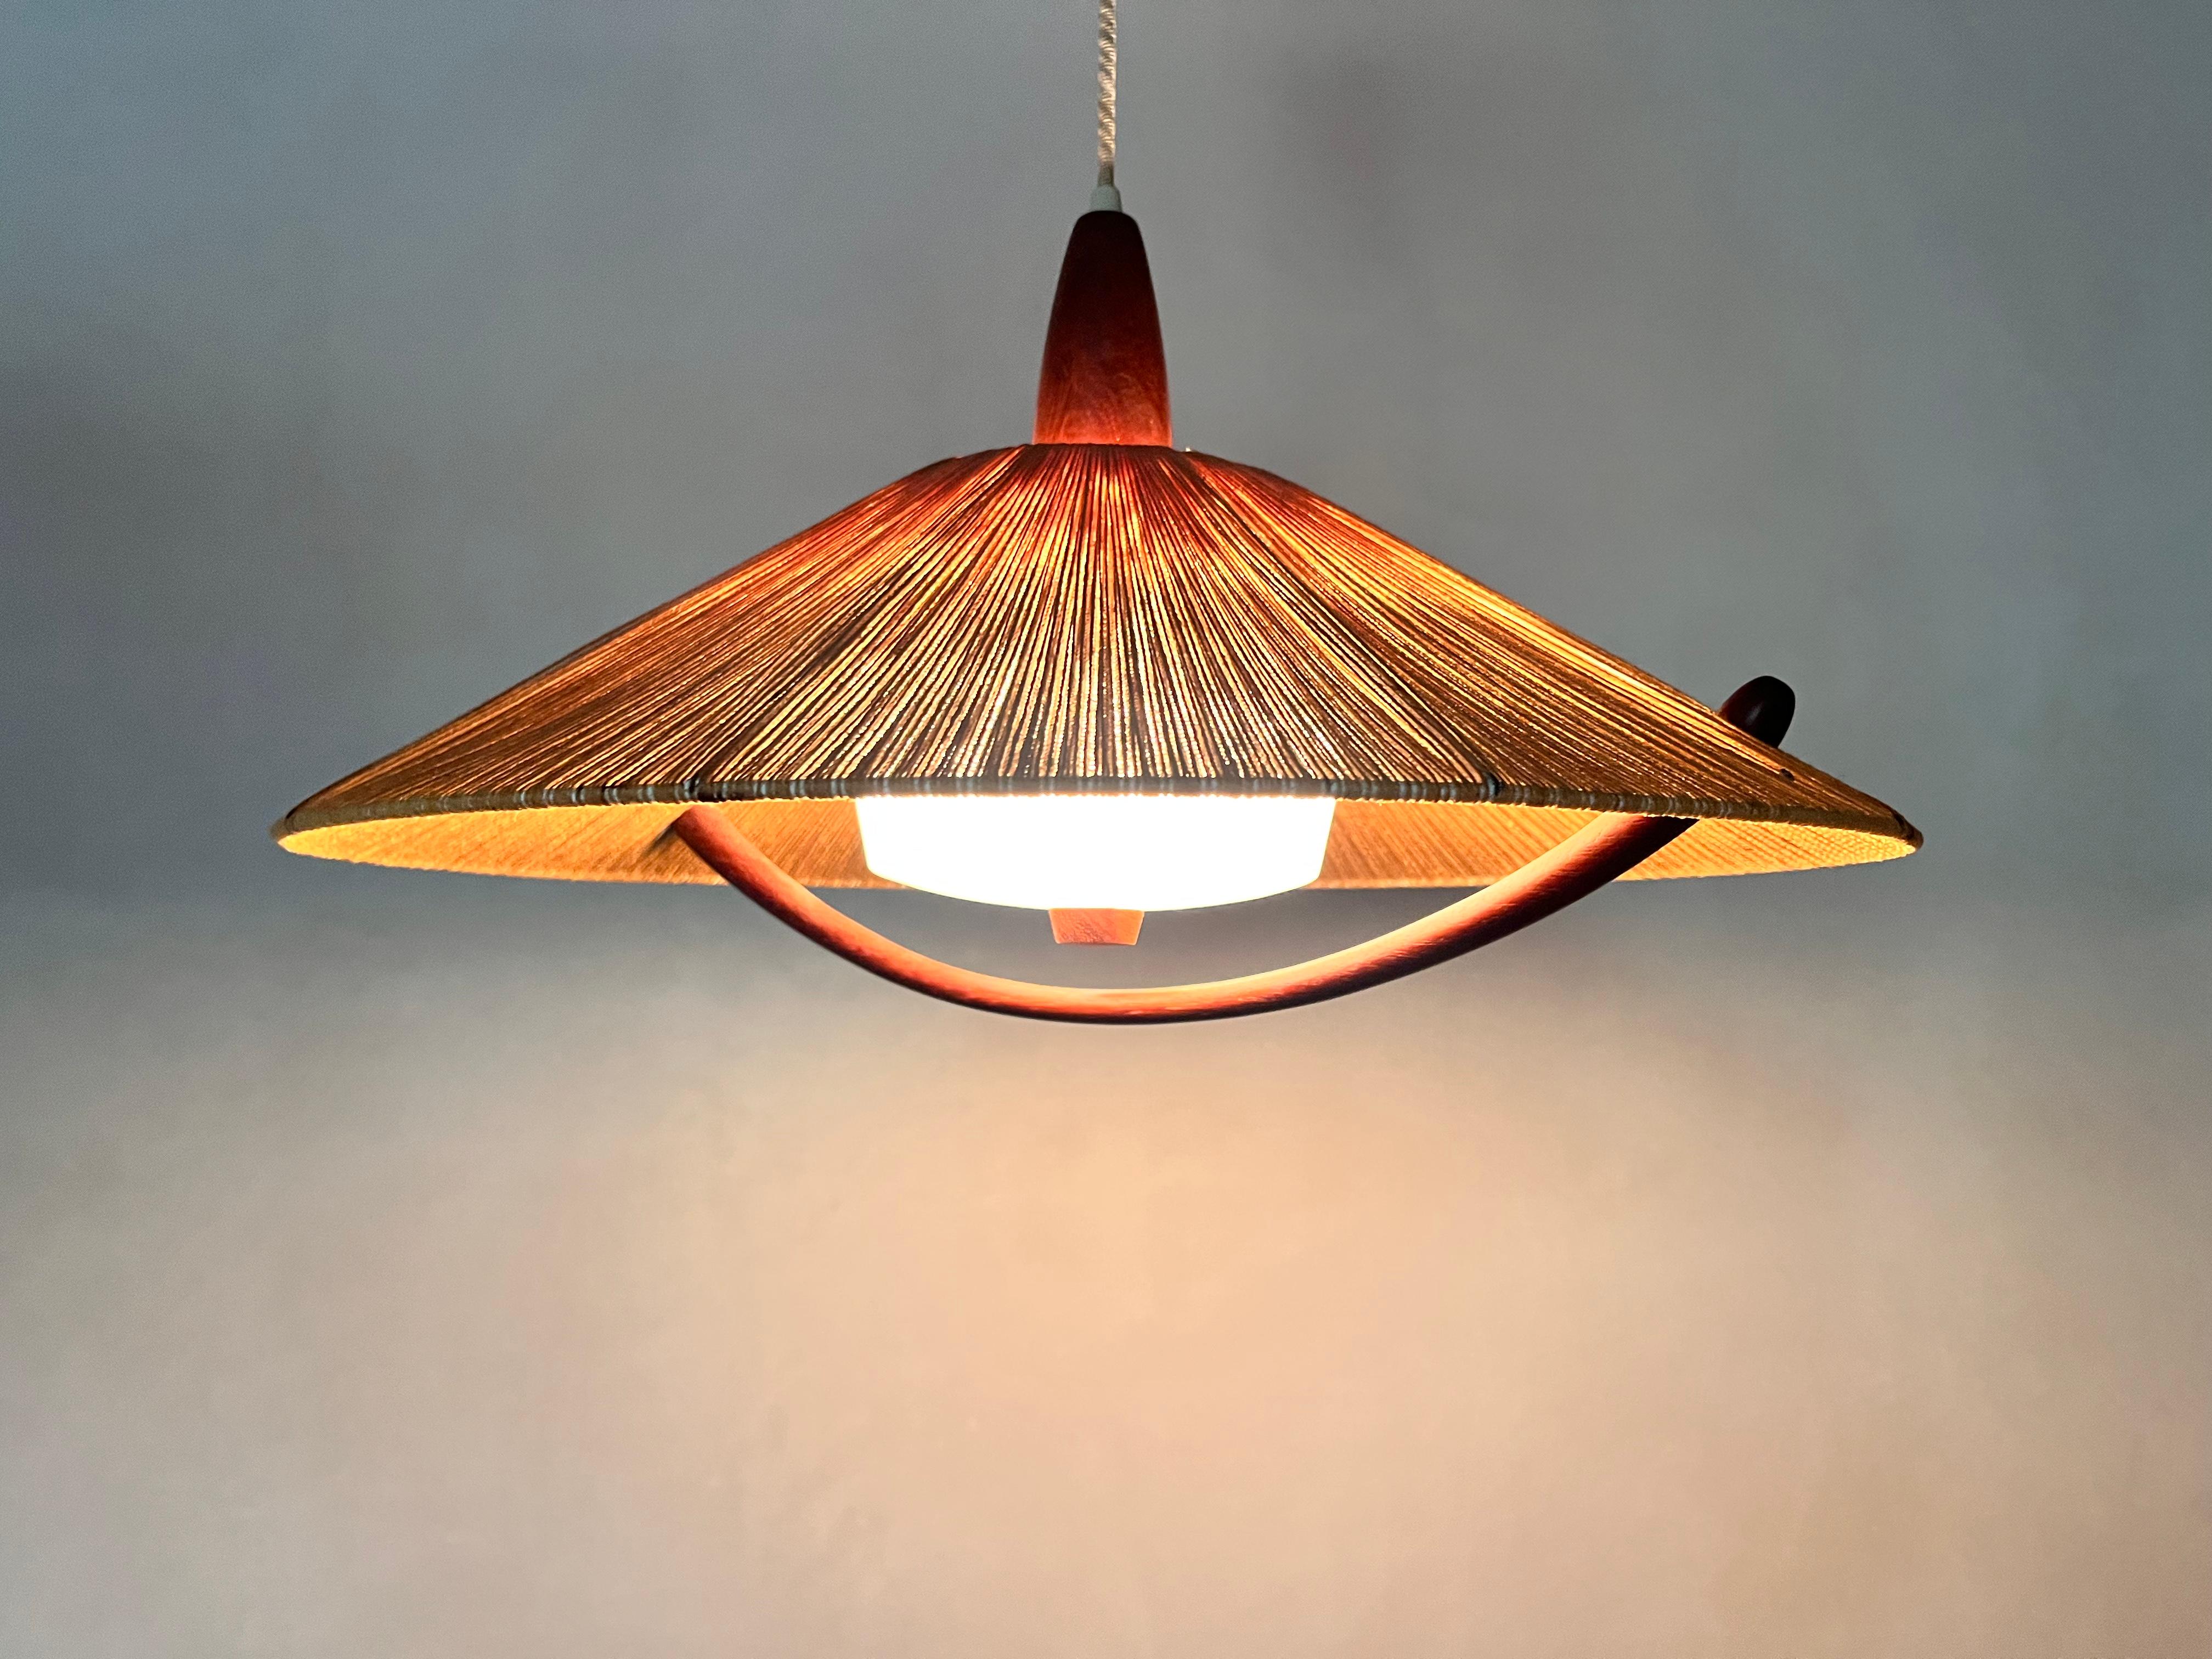 Midcentury Teak and Cord Shade Hanging Lamp by Temde, circa 1960 For Sale 4